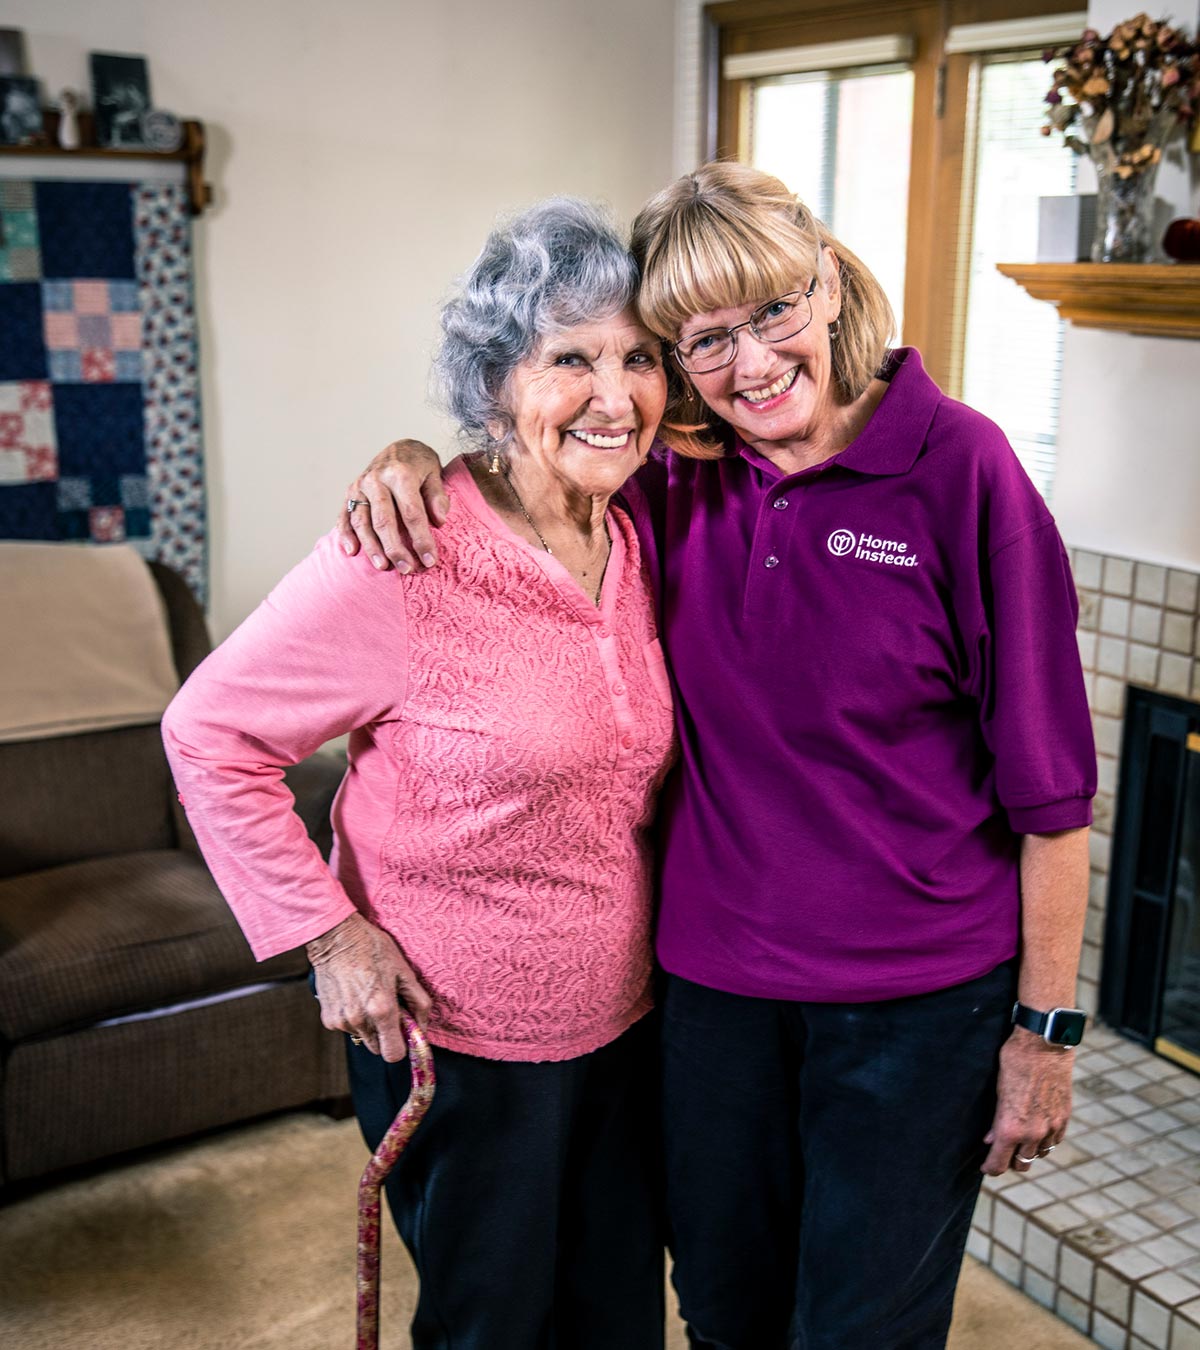 Home Instead CAREGiver and senior standing together smiling in home